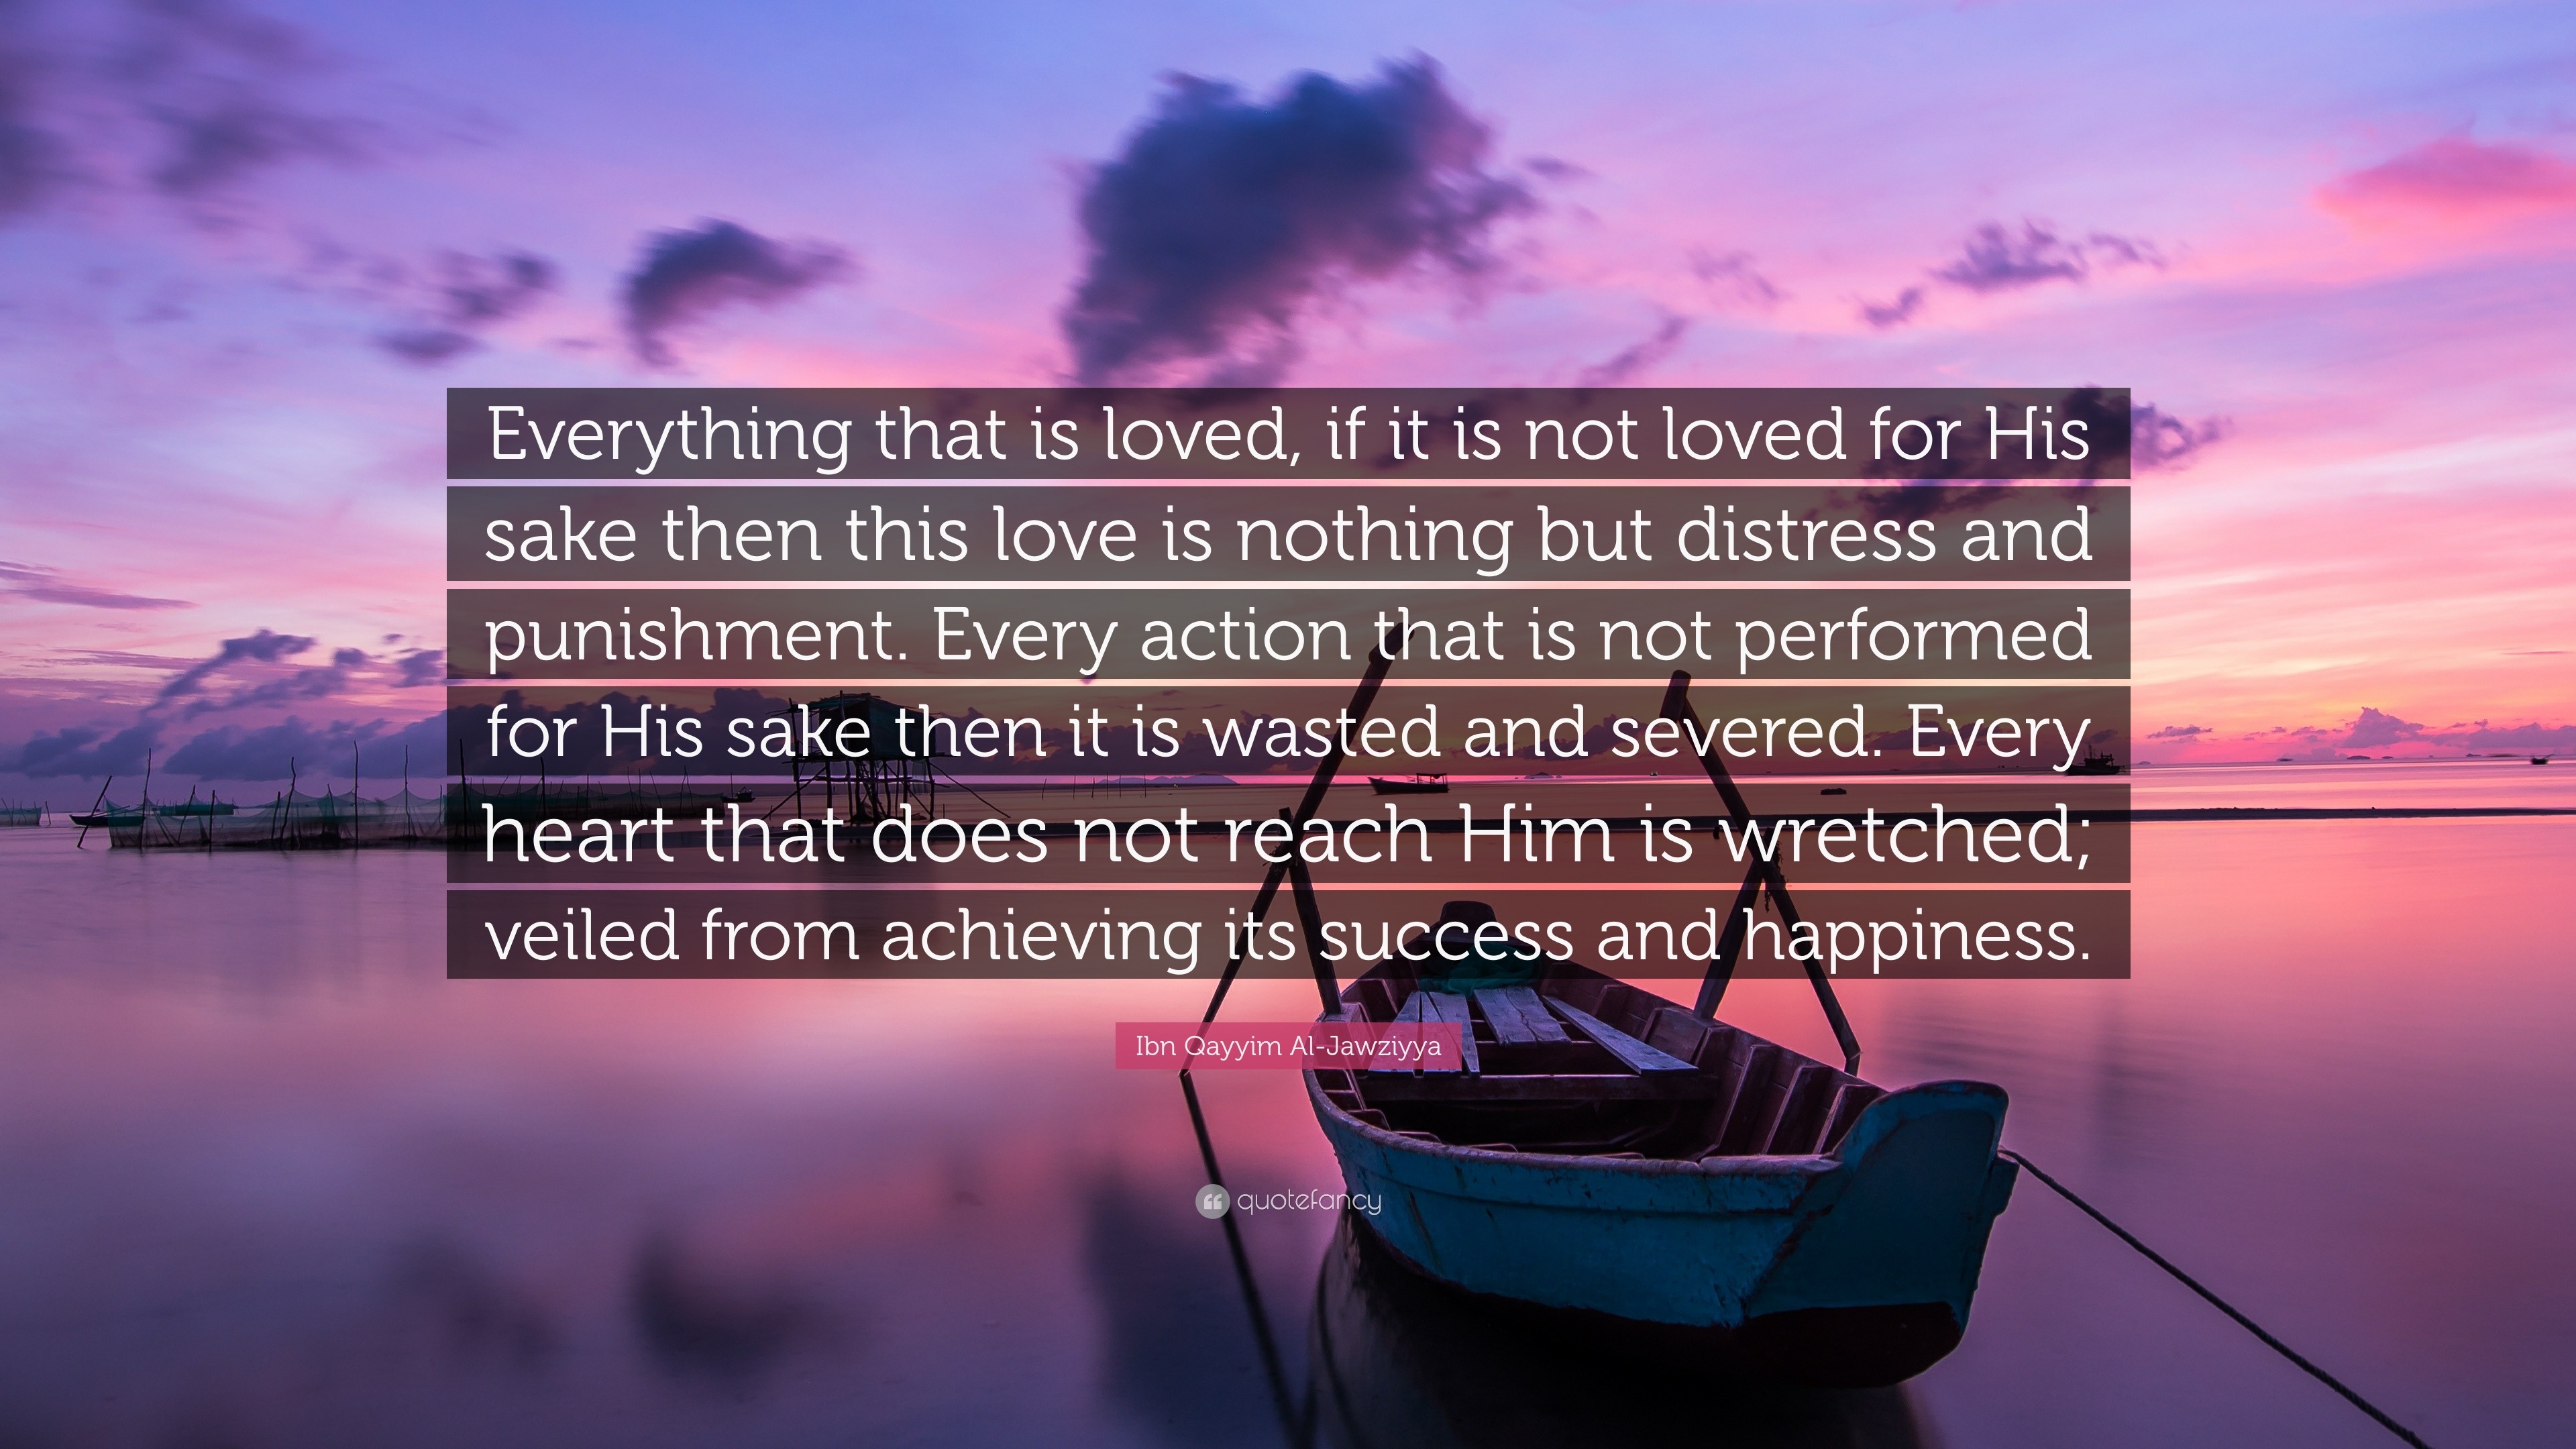 Ibn Qayyim Al-Jawziyya Quote: “Everything that is loved, if it is not ...